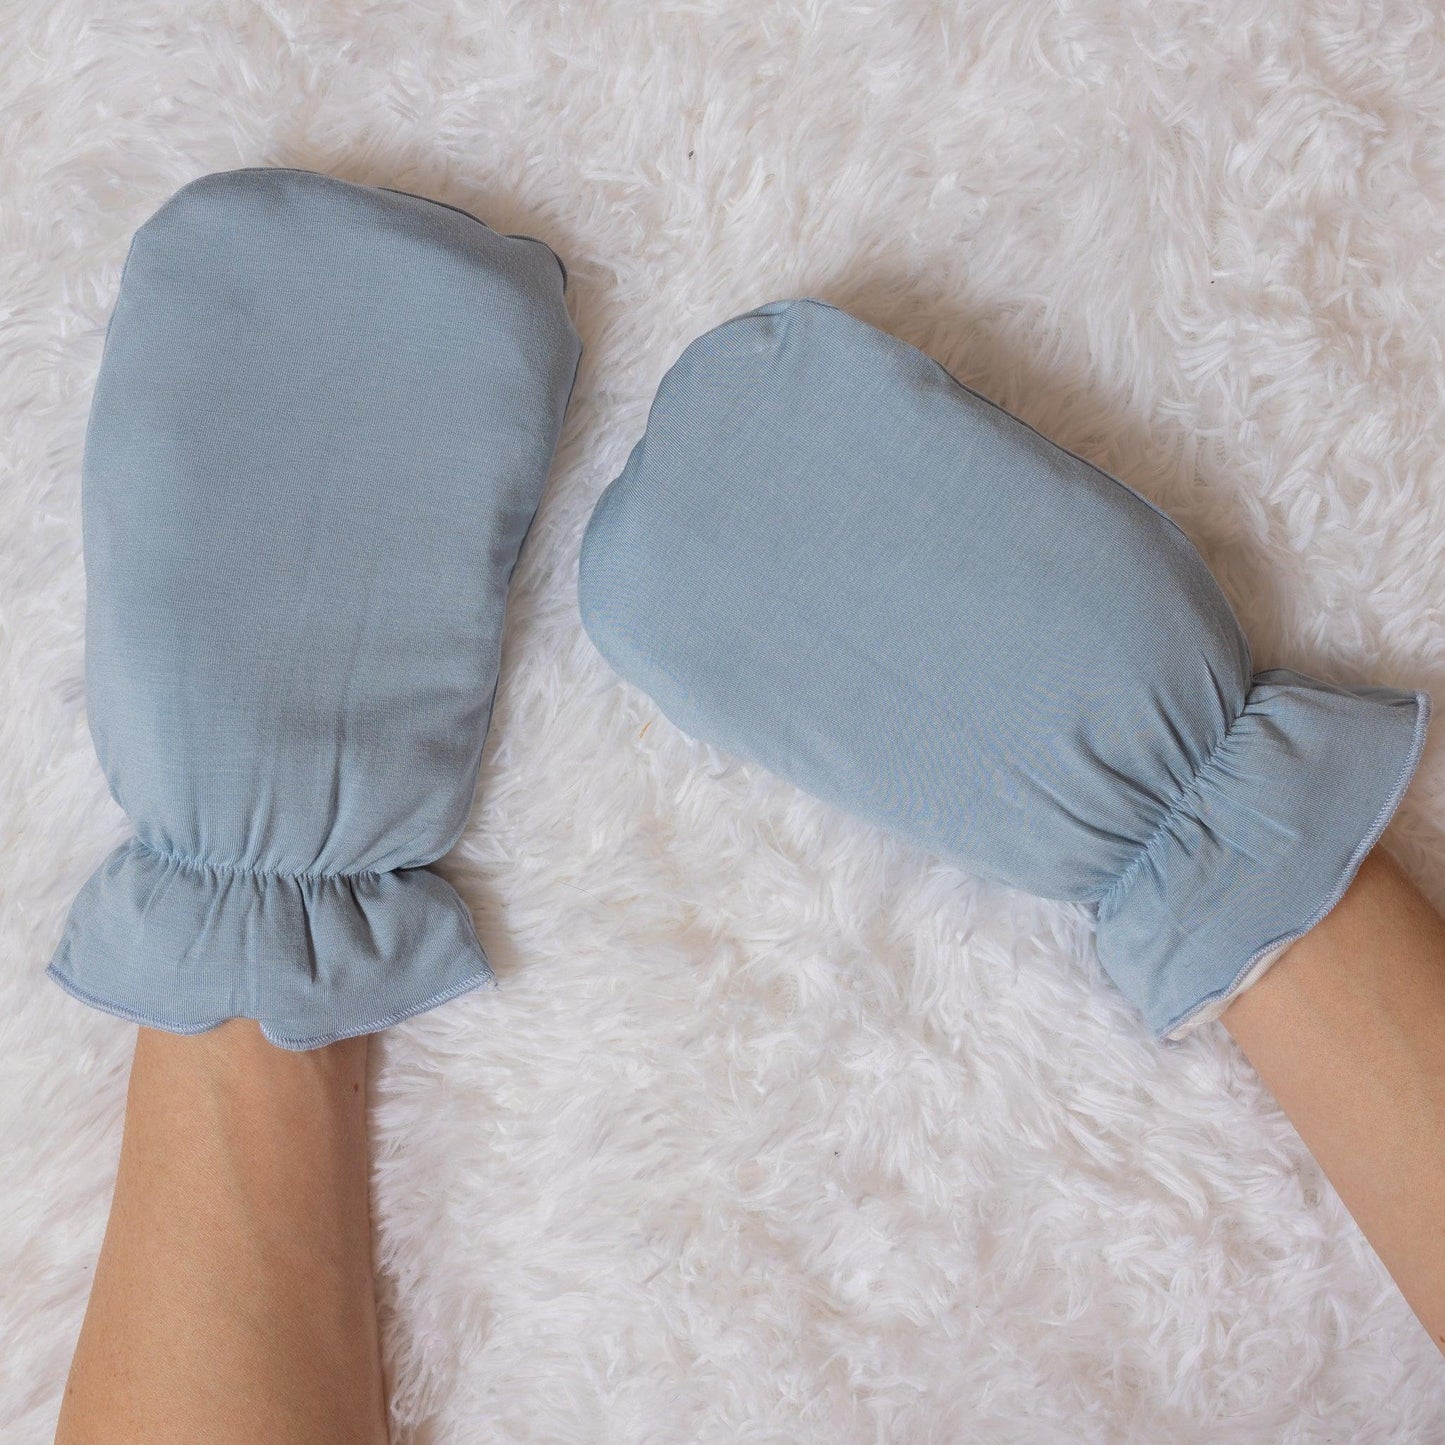 Baby Blue- Adult Mittens